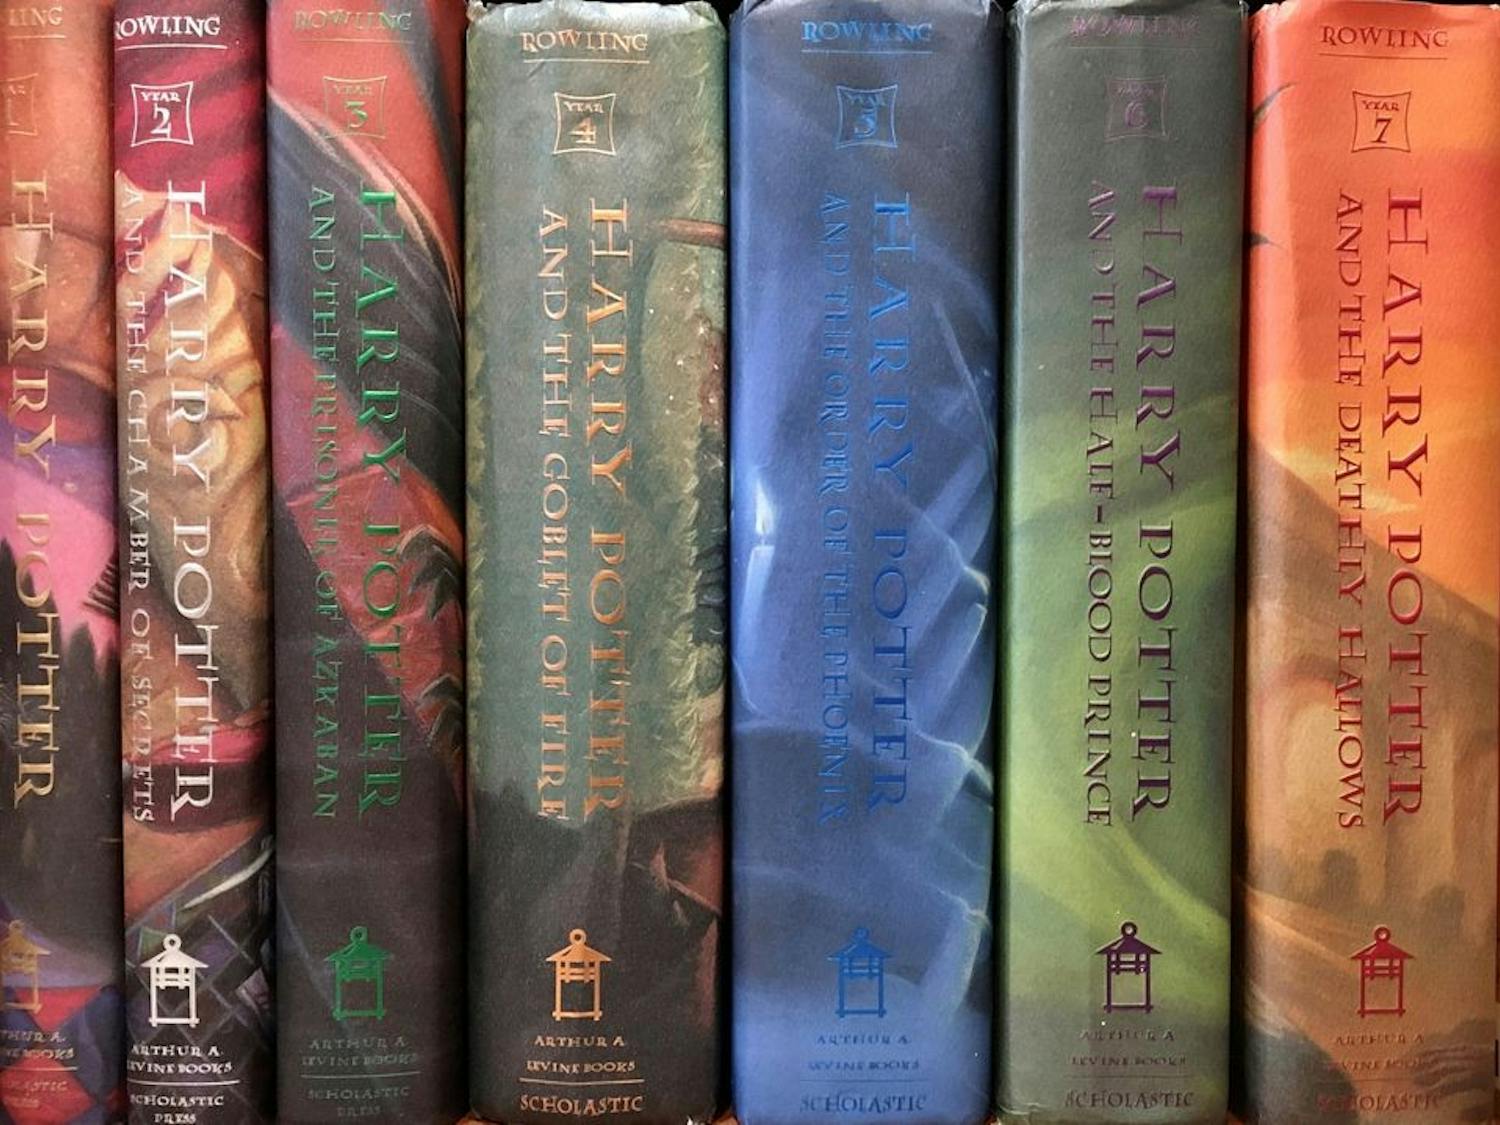 A collection of the Harry Potter book series. Courtesy of Tribune News Service. 